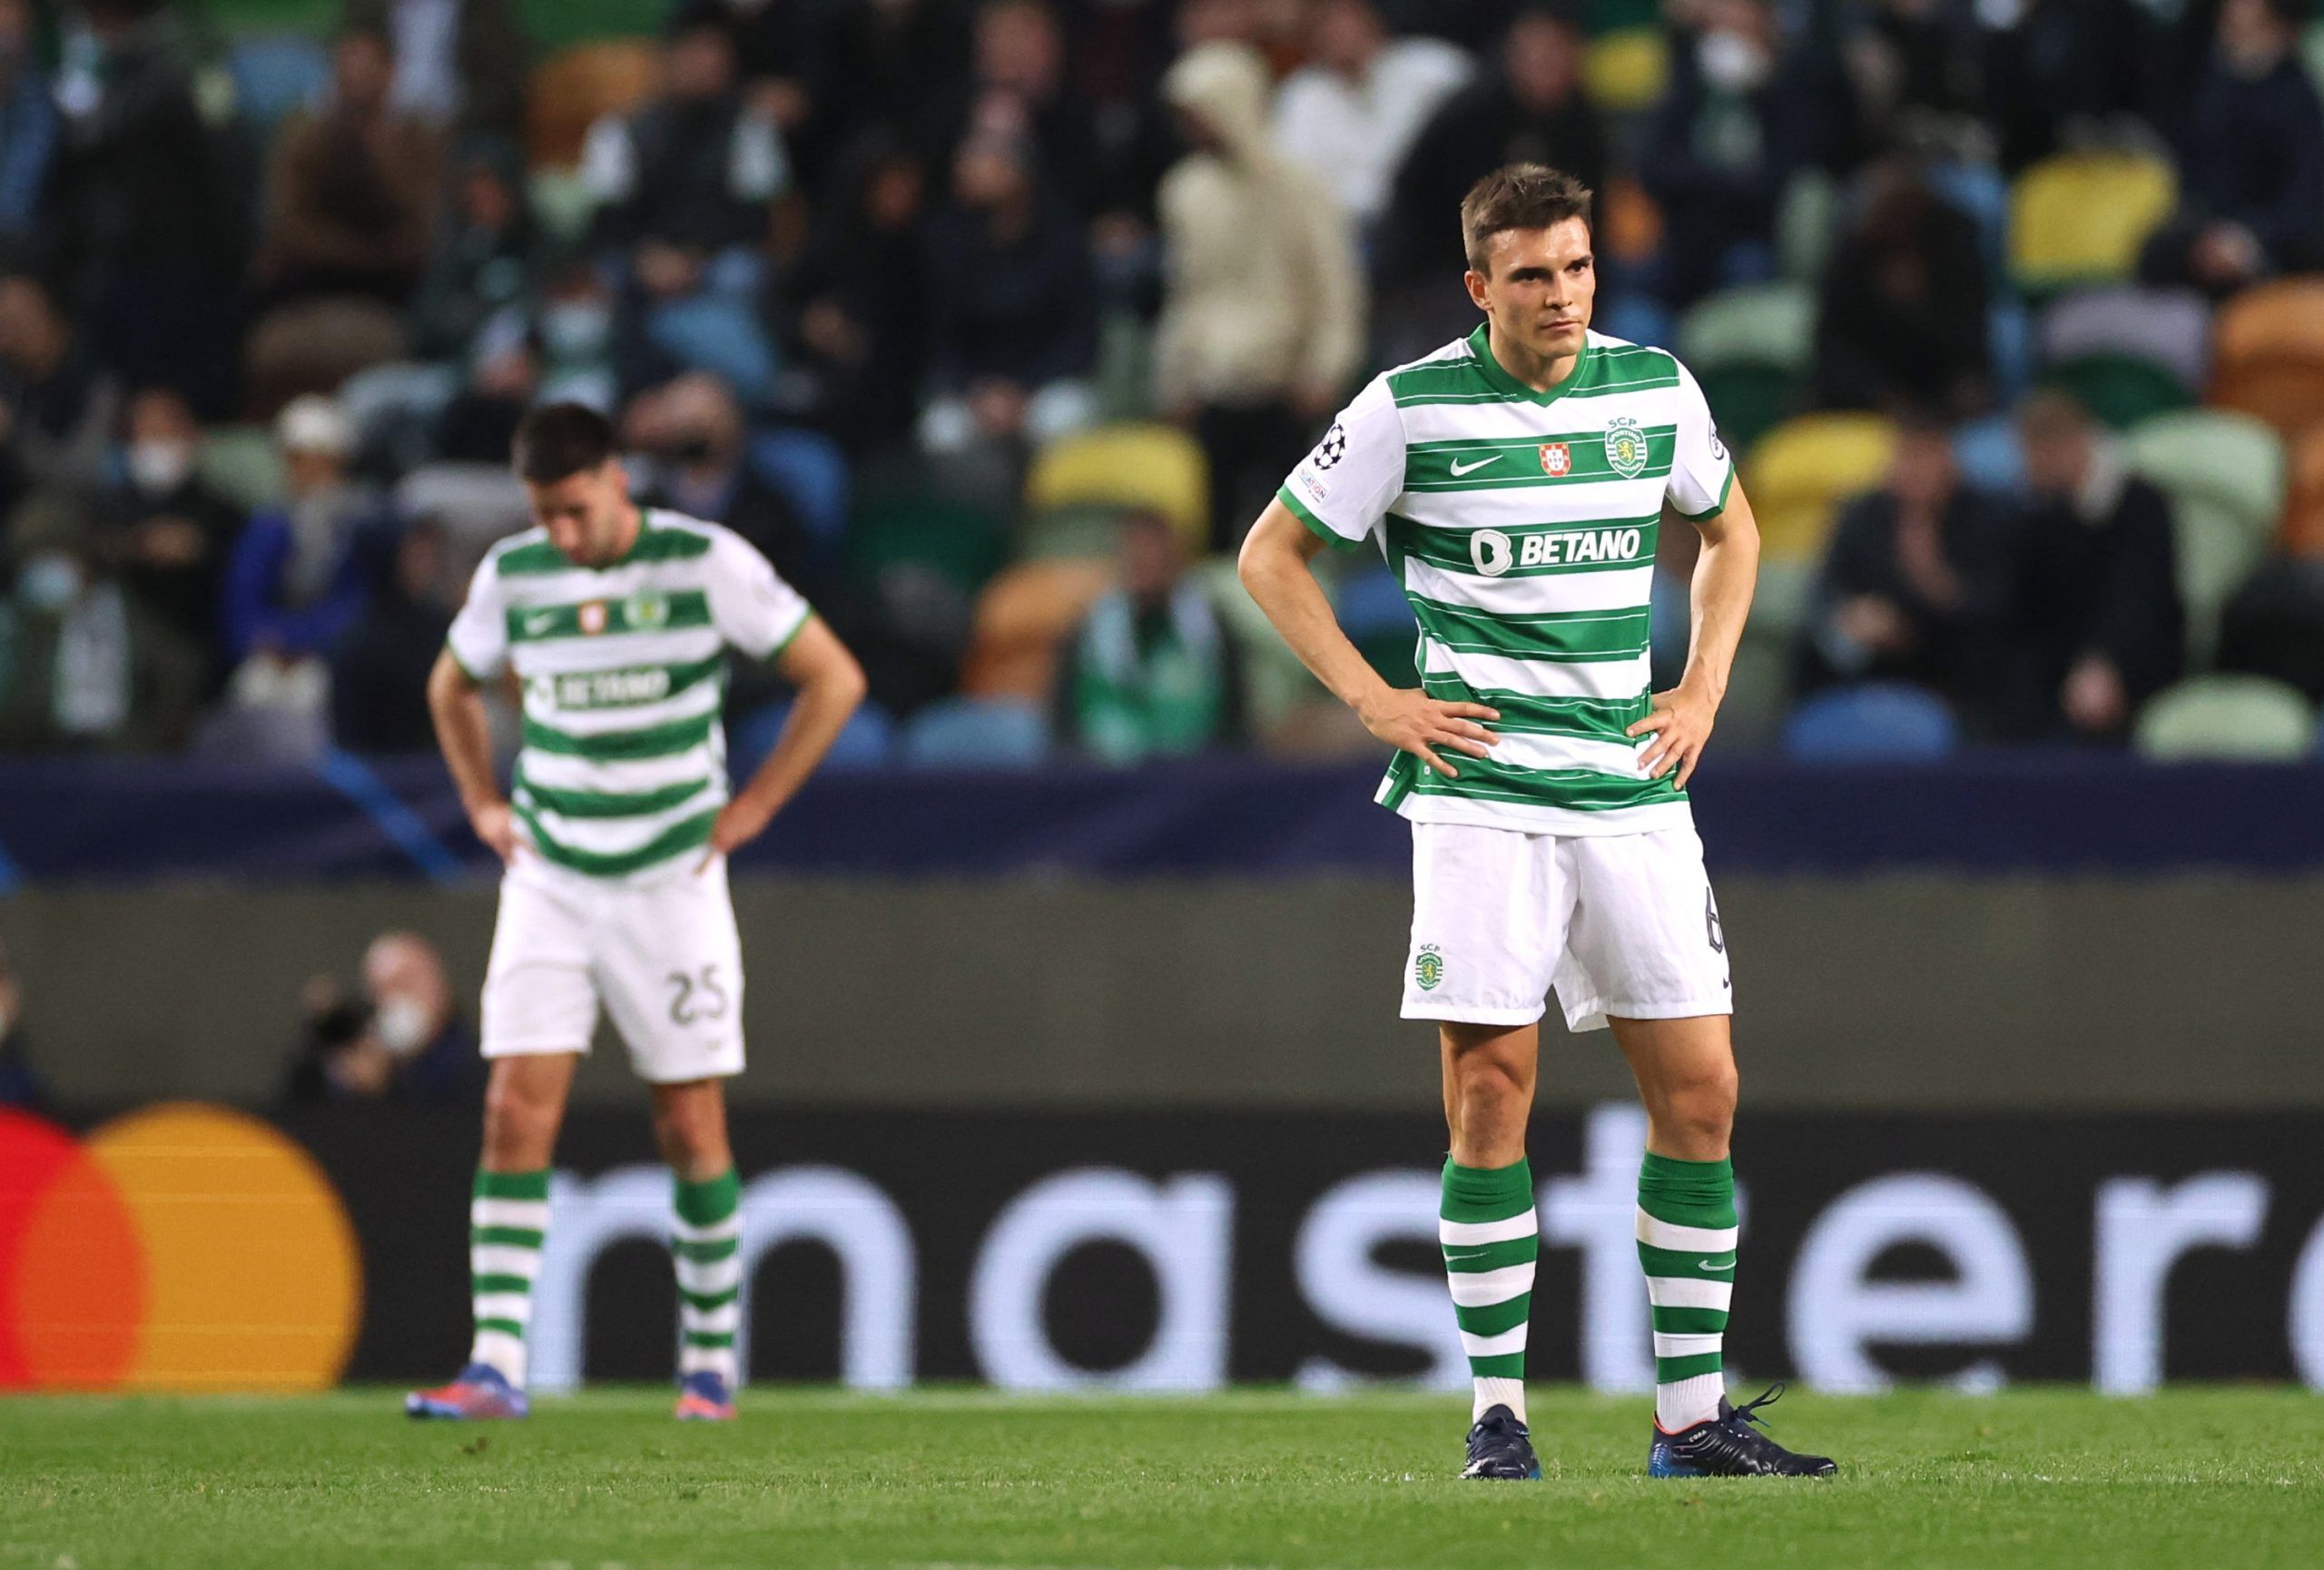 Soccer Football - Champions League - Round of 16 First Leg - Sporting CP v Manchester City - Estadio Jose Alvalade, Lisbon, Portugal - February 15, 2022 Sporting CP's Joao Palhinha looks dejected after Manchester City's Bernardo Silva scores their fourth goal Action Images via Reuters/Carl Recine